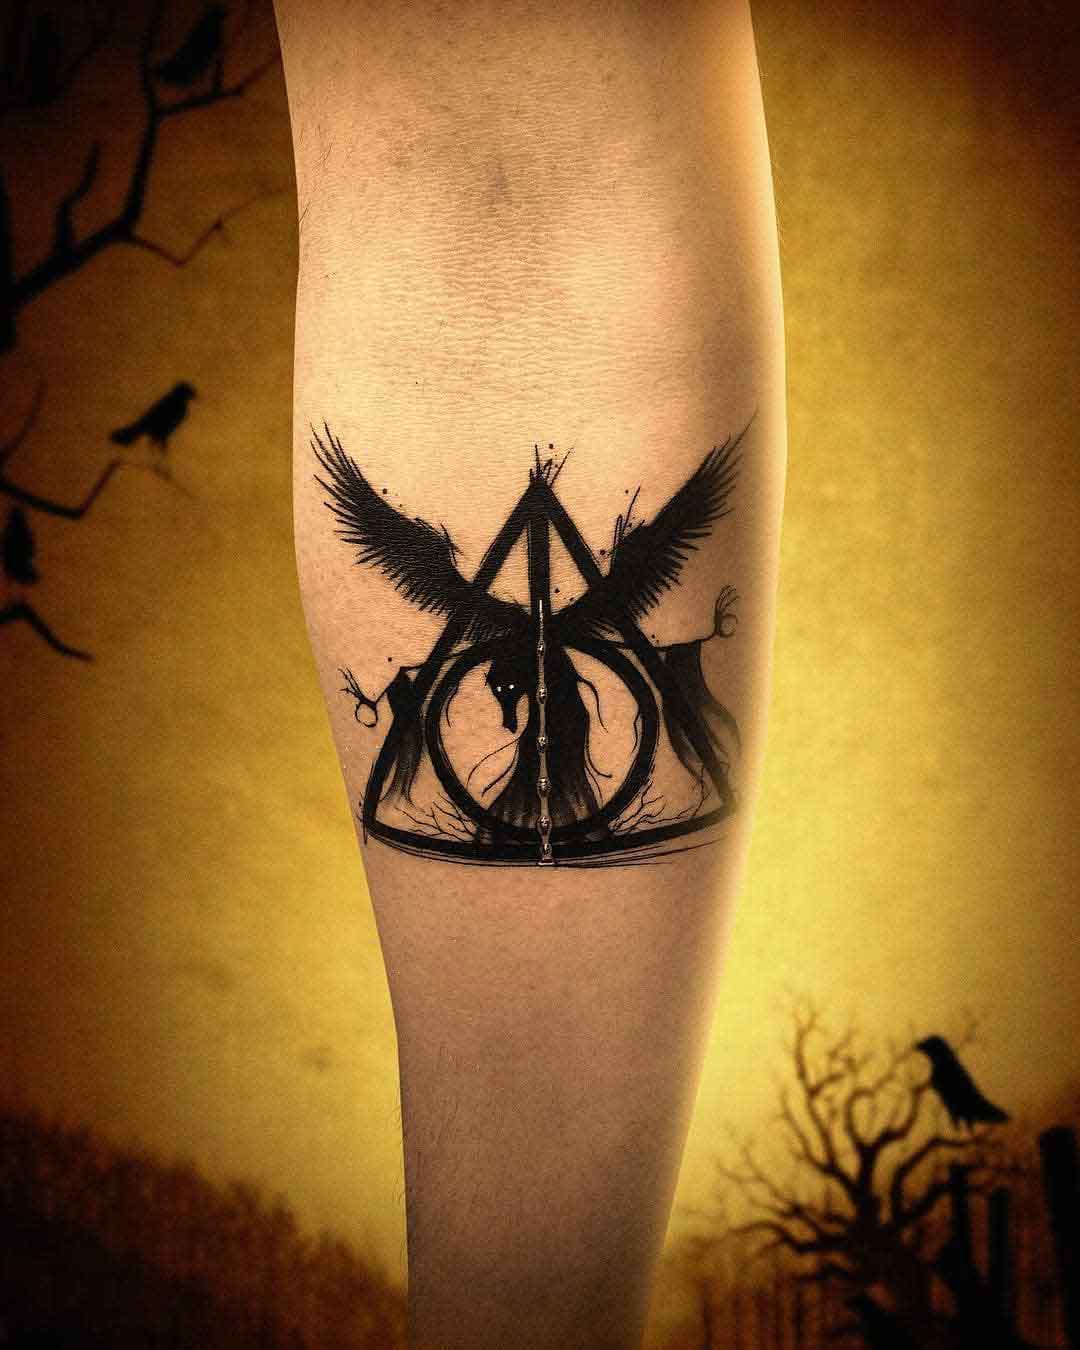 The Deathly Hallows symbol is a circle, line, and triangle combined. These  represent the three Deathly Hallows: the circle is the… | Instagram